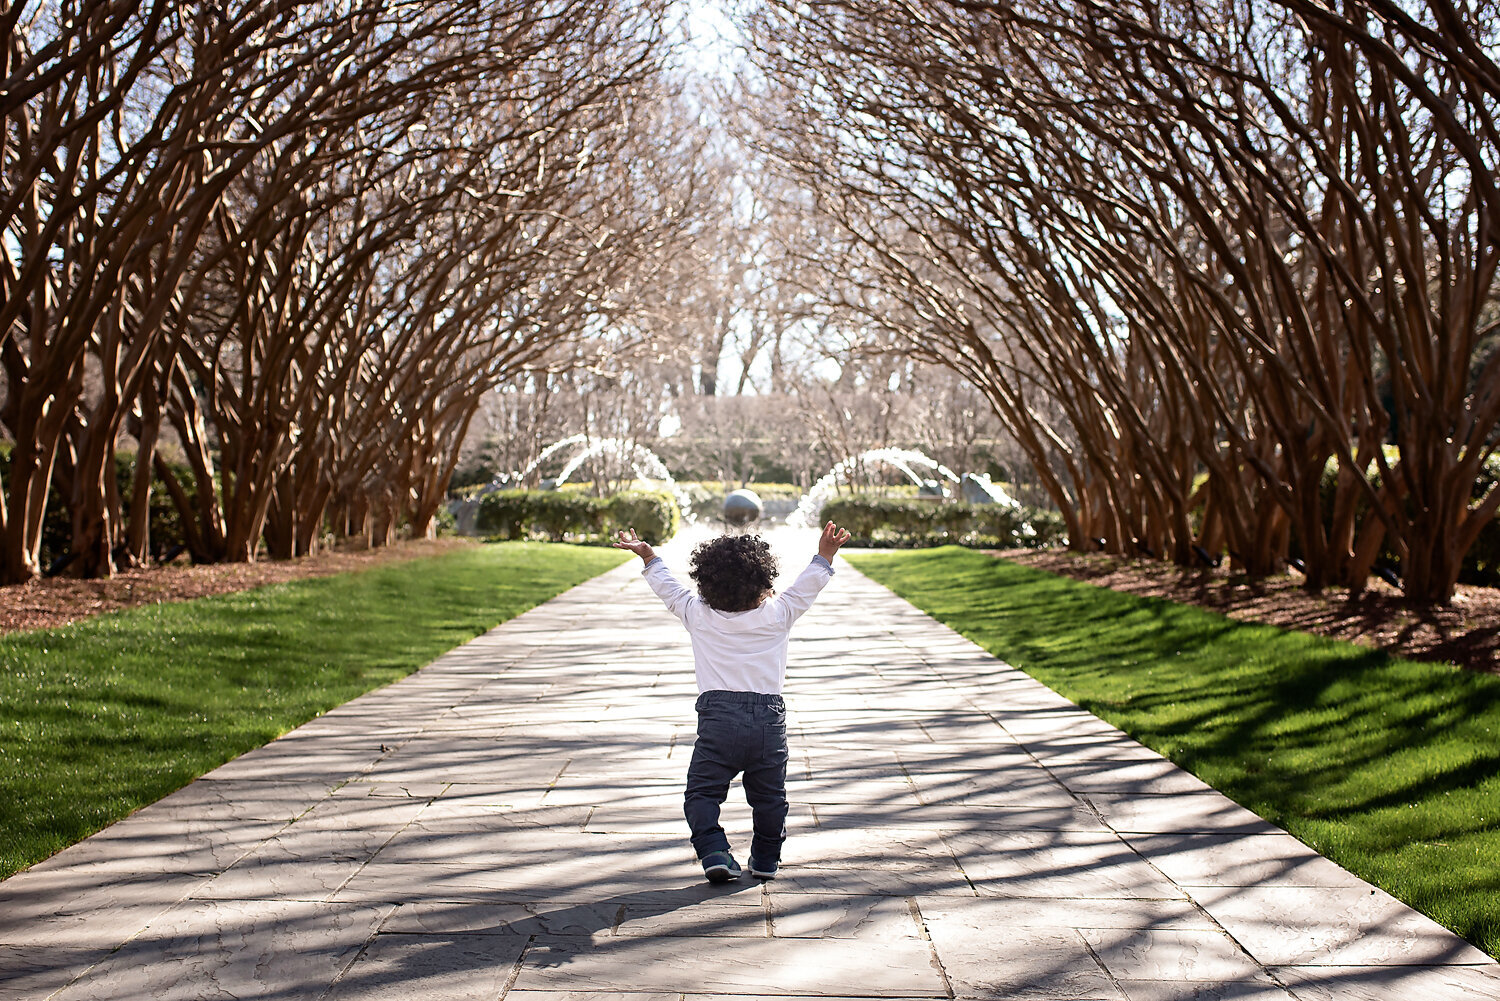 One year old boy with his arms in the air walking down a path under a canopy of trees  at the Dallas Arboretum.